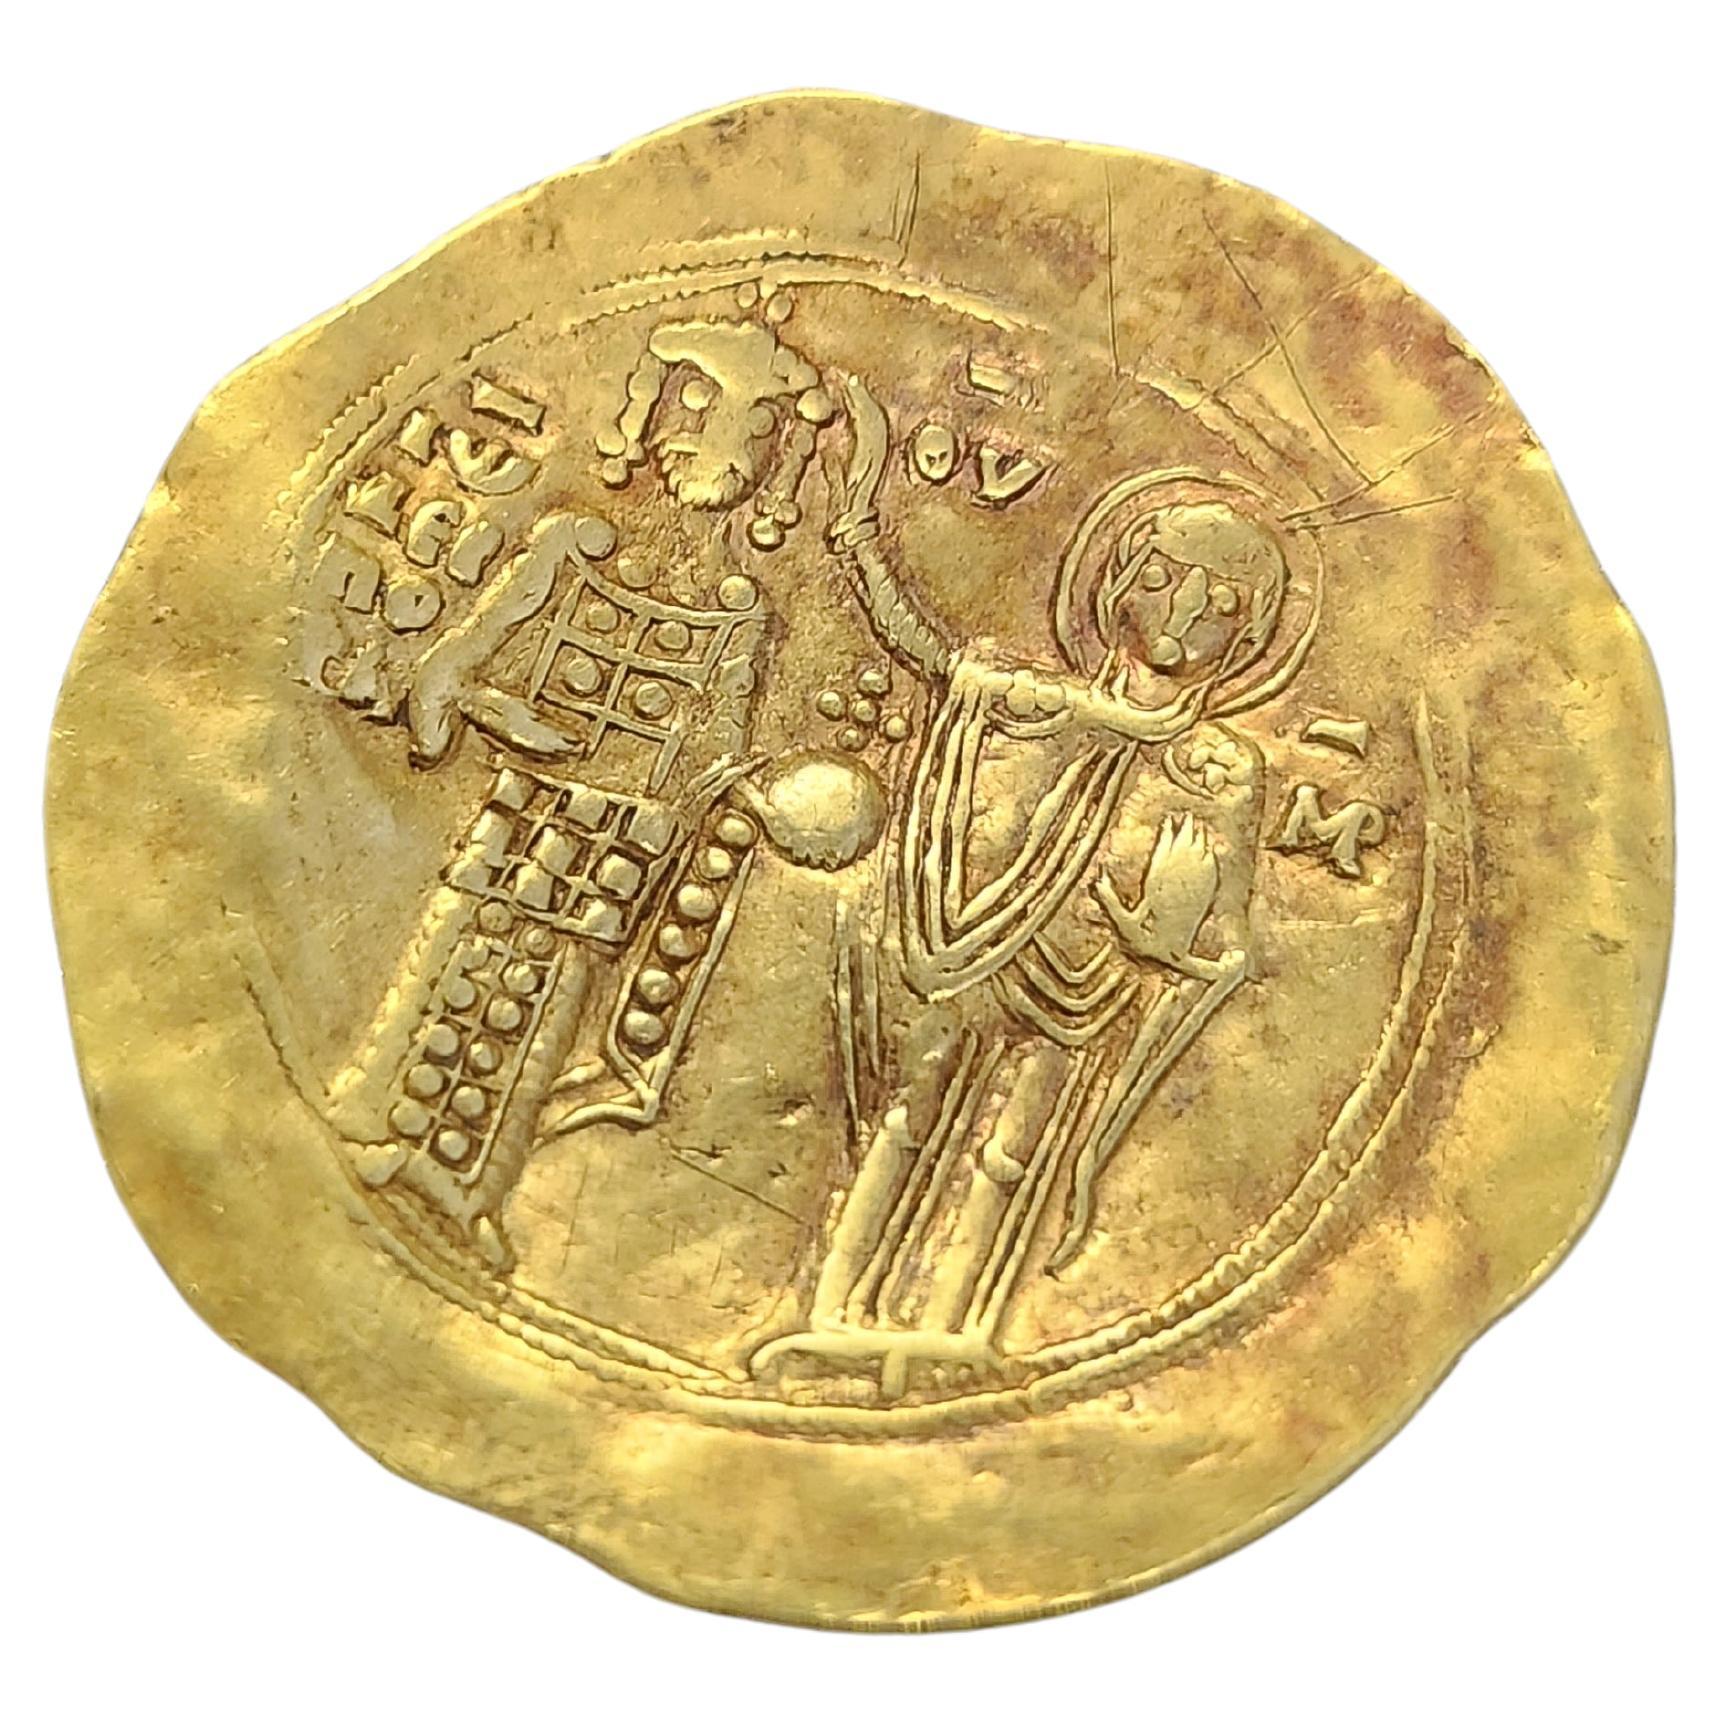 Byzantine era high karat gold coin that can be used as pendant dates back to 1221-1254 ruler john 111 doukas vatatzes and virgin nimbate emperor and other coin side christ seated upon backless throne 